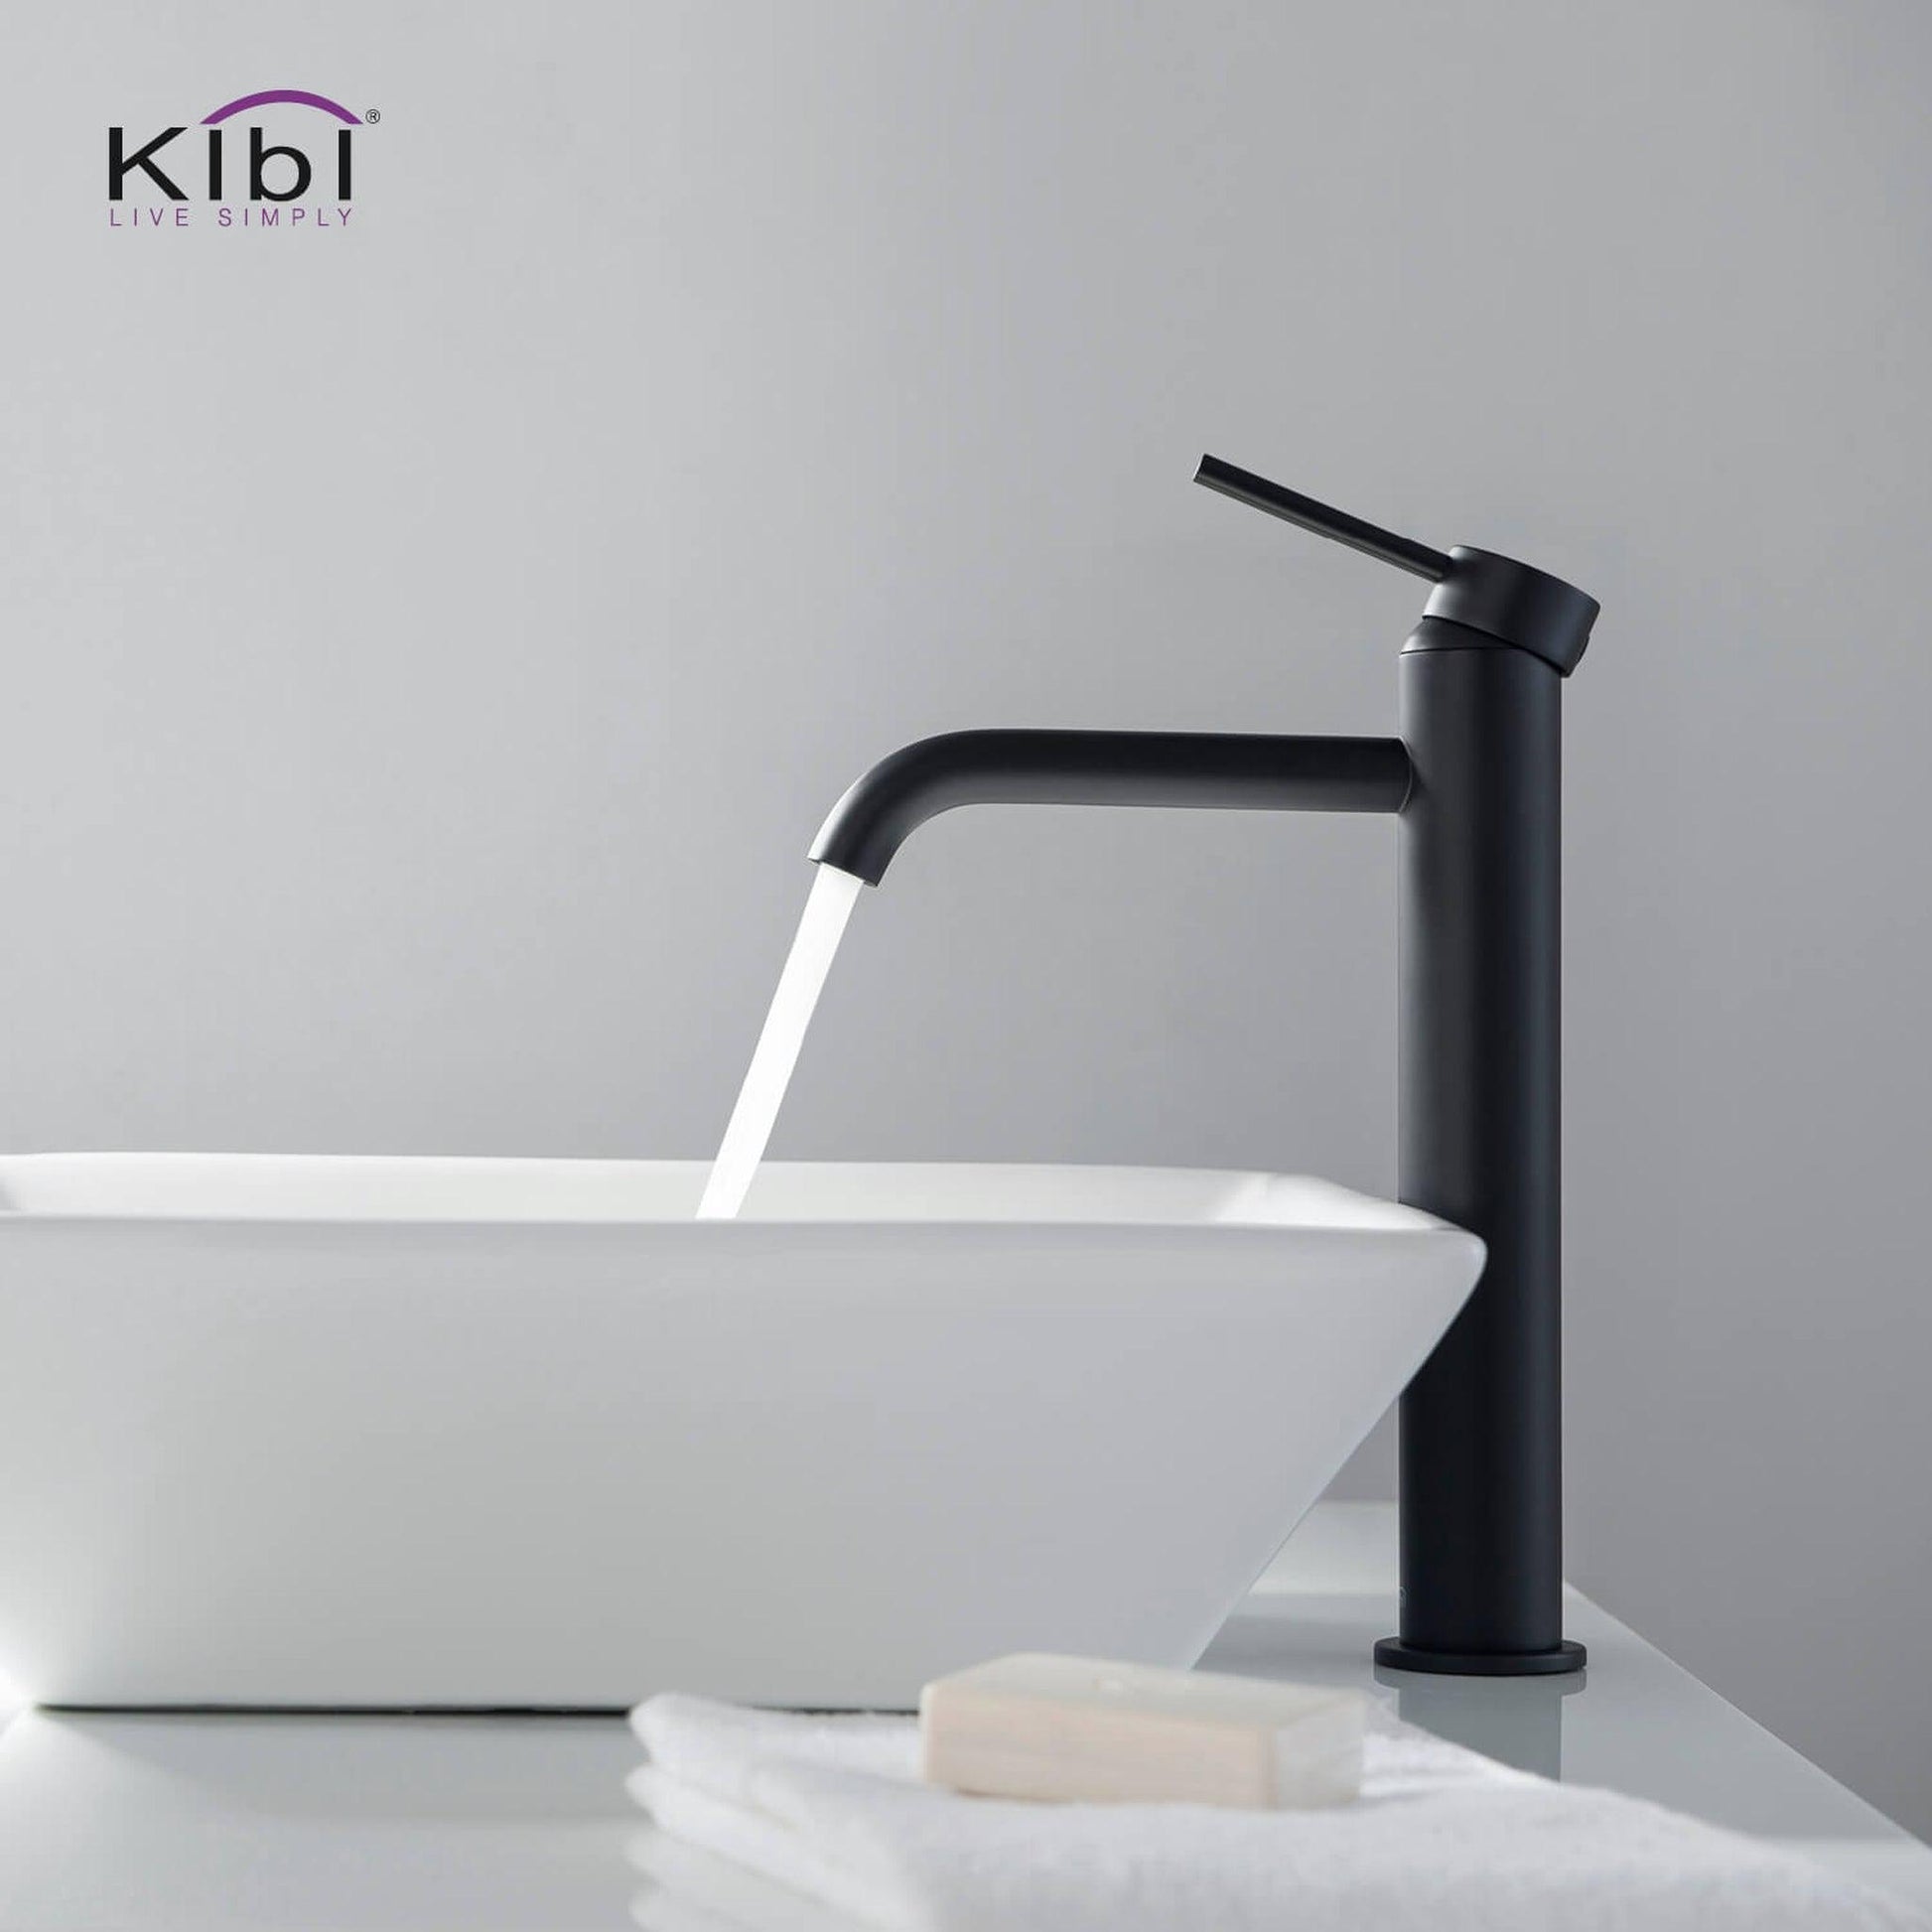 KIBI Circular Single Handle Matte Black Solid Brass Bathroom Vessel Sink Faucet With Pop-Up Drain Stopper Small Cover Without Overflow